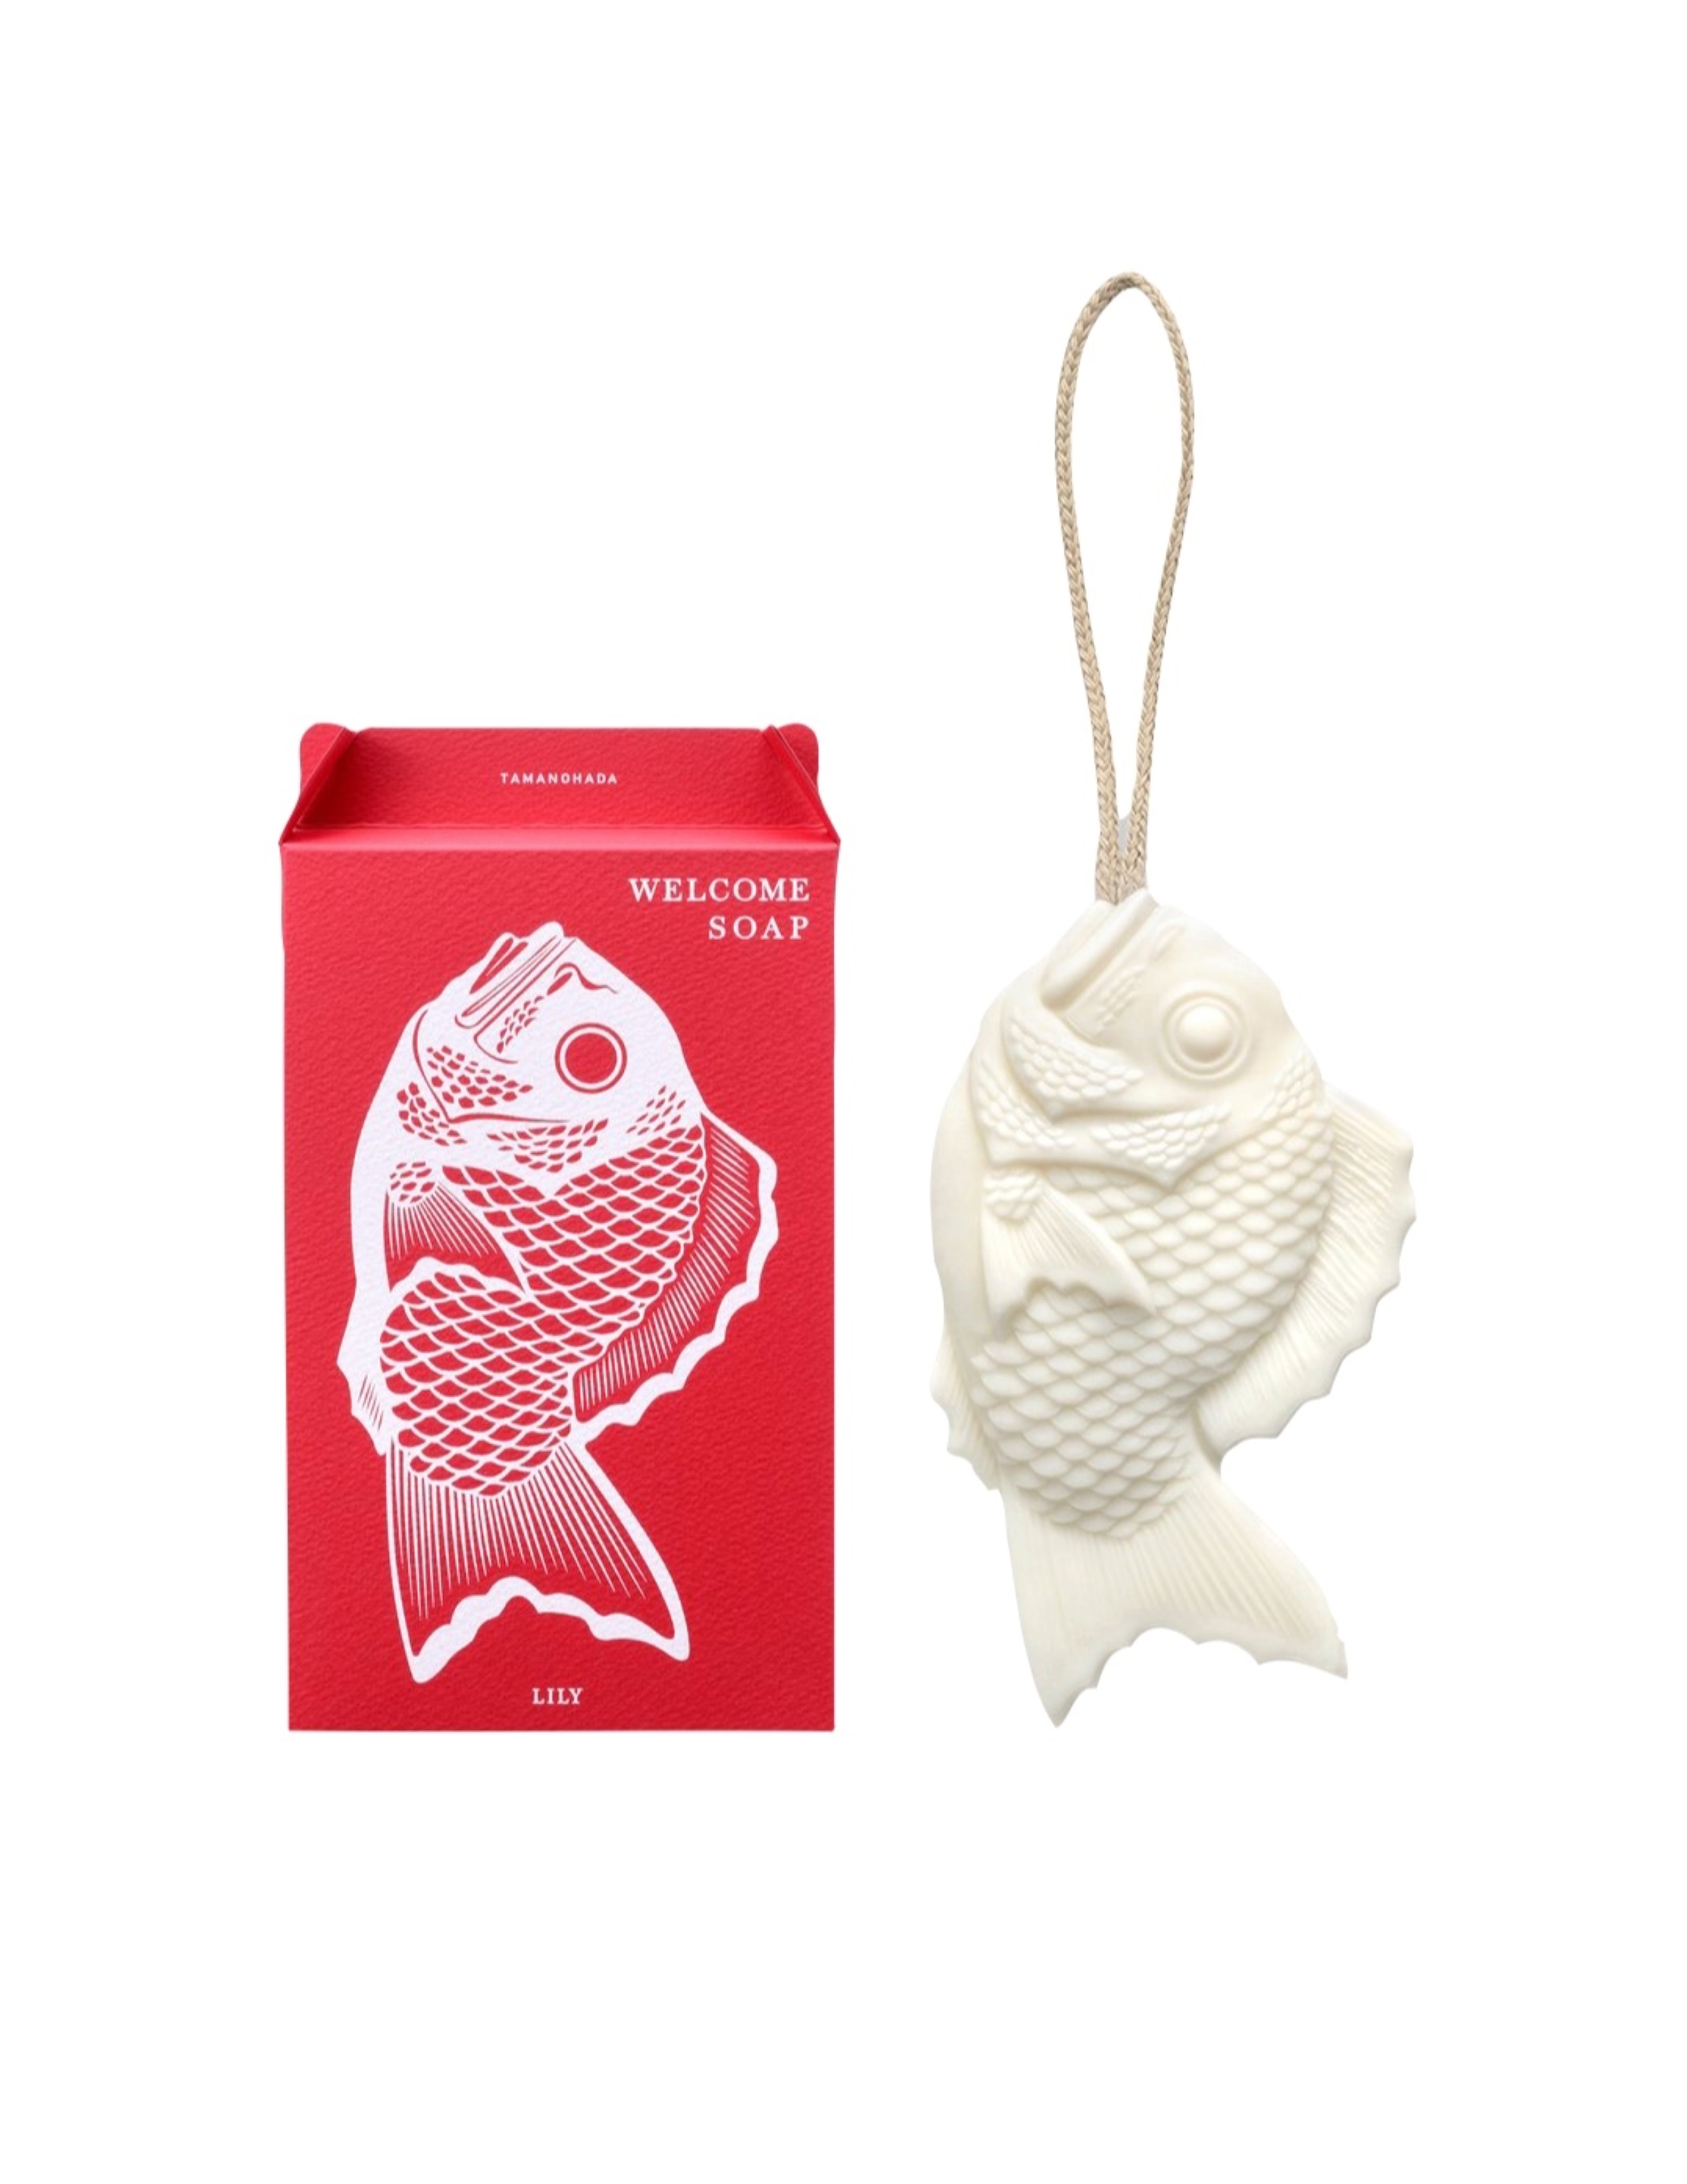 Bath/Beauty -- Fish Soap on a Rope, perfect for Father's Day!